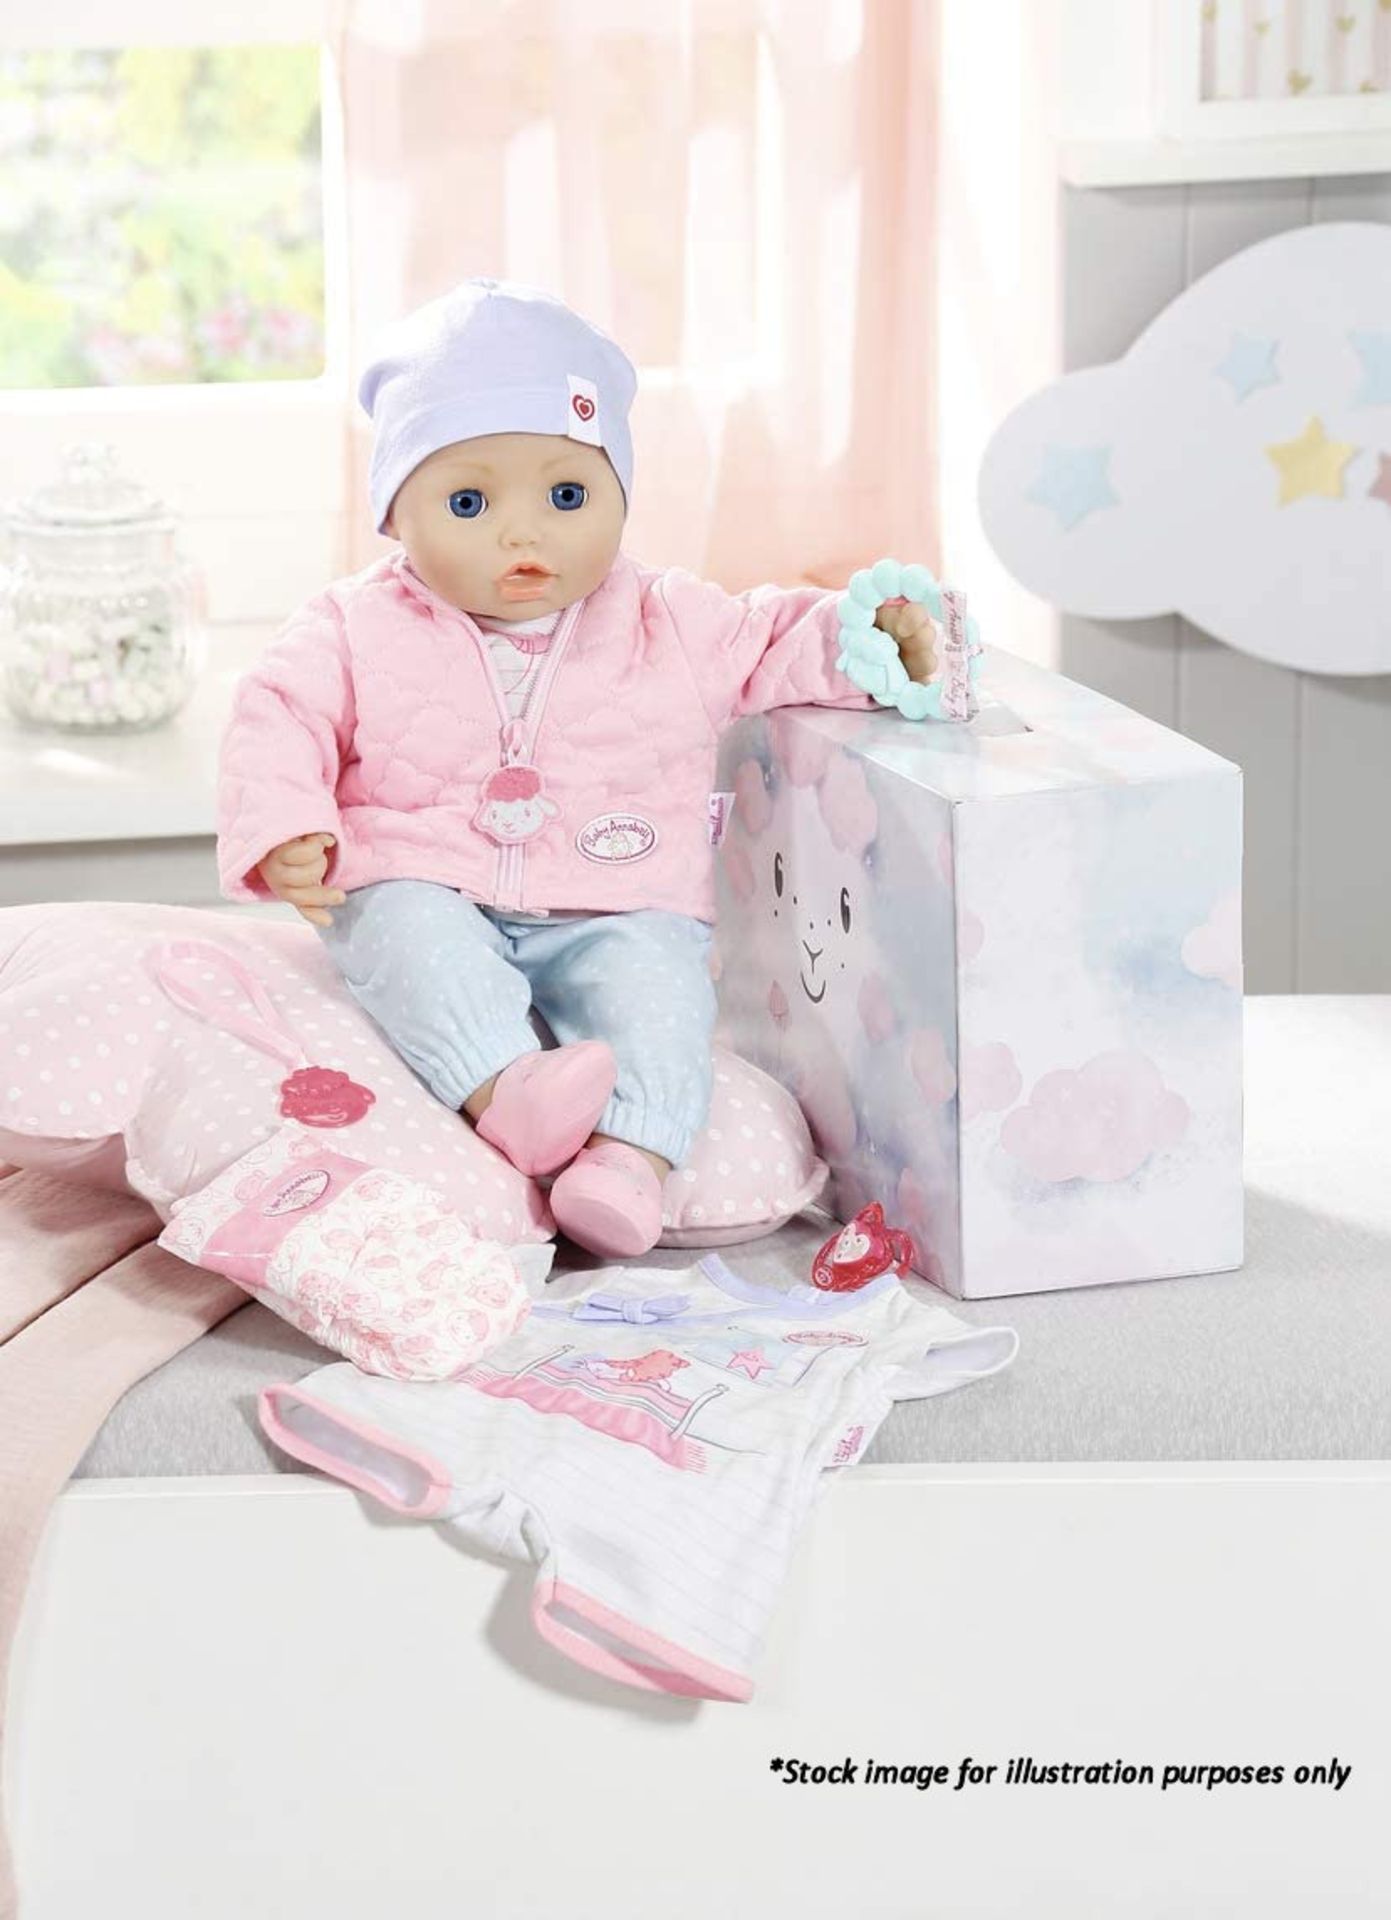 1 x Baby Annabell Baby Mix & Match Combi Set - New/Boxed - HTYS312 - CL987 - Location: Altrincham